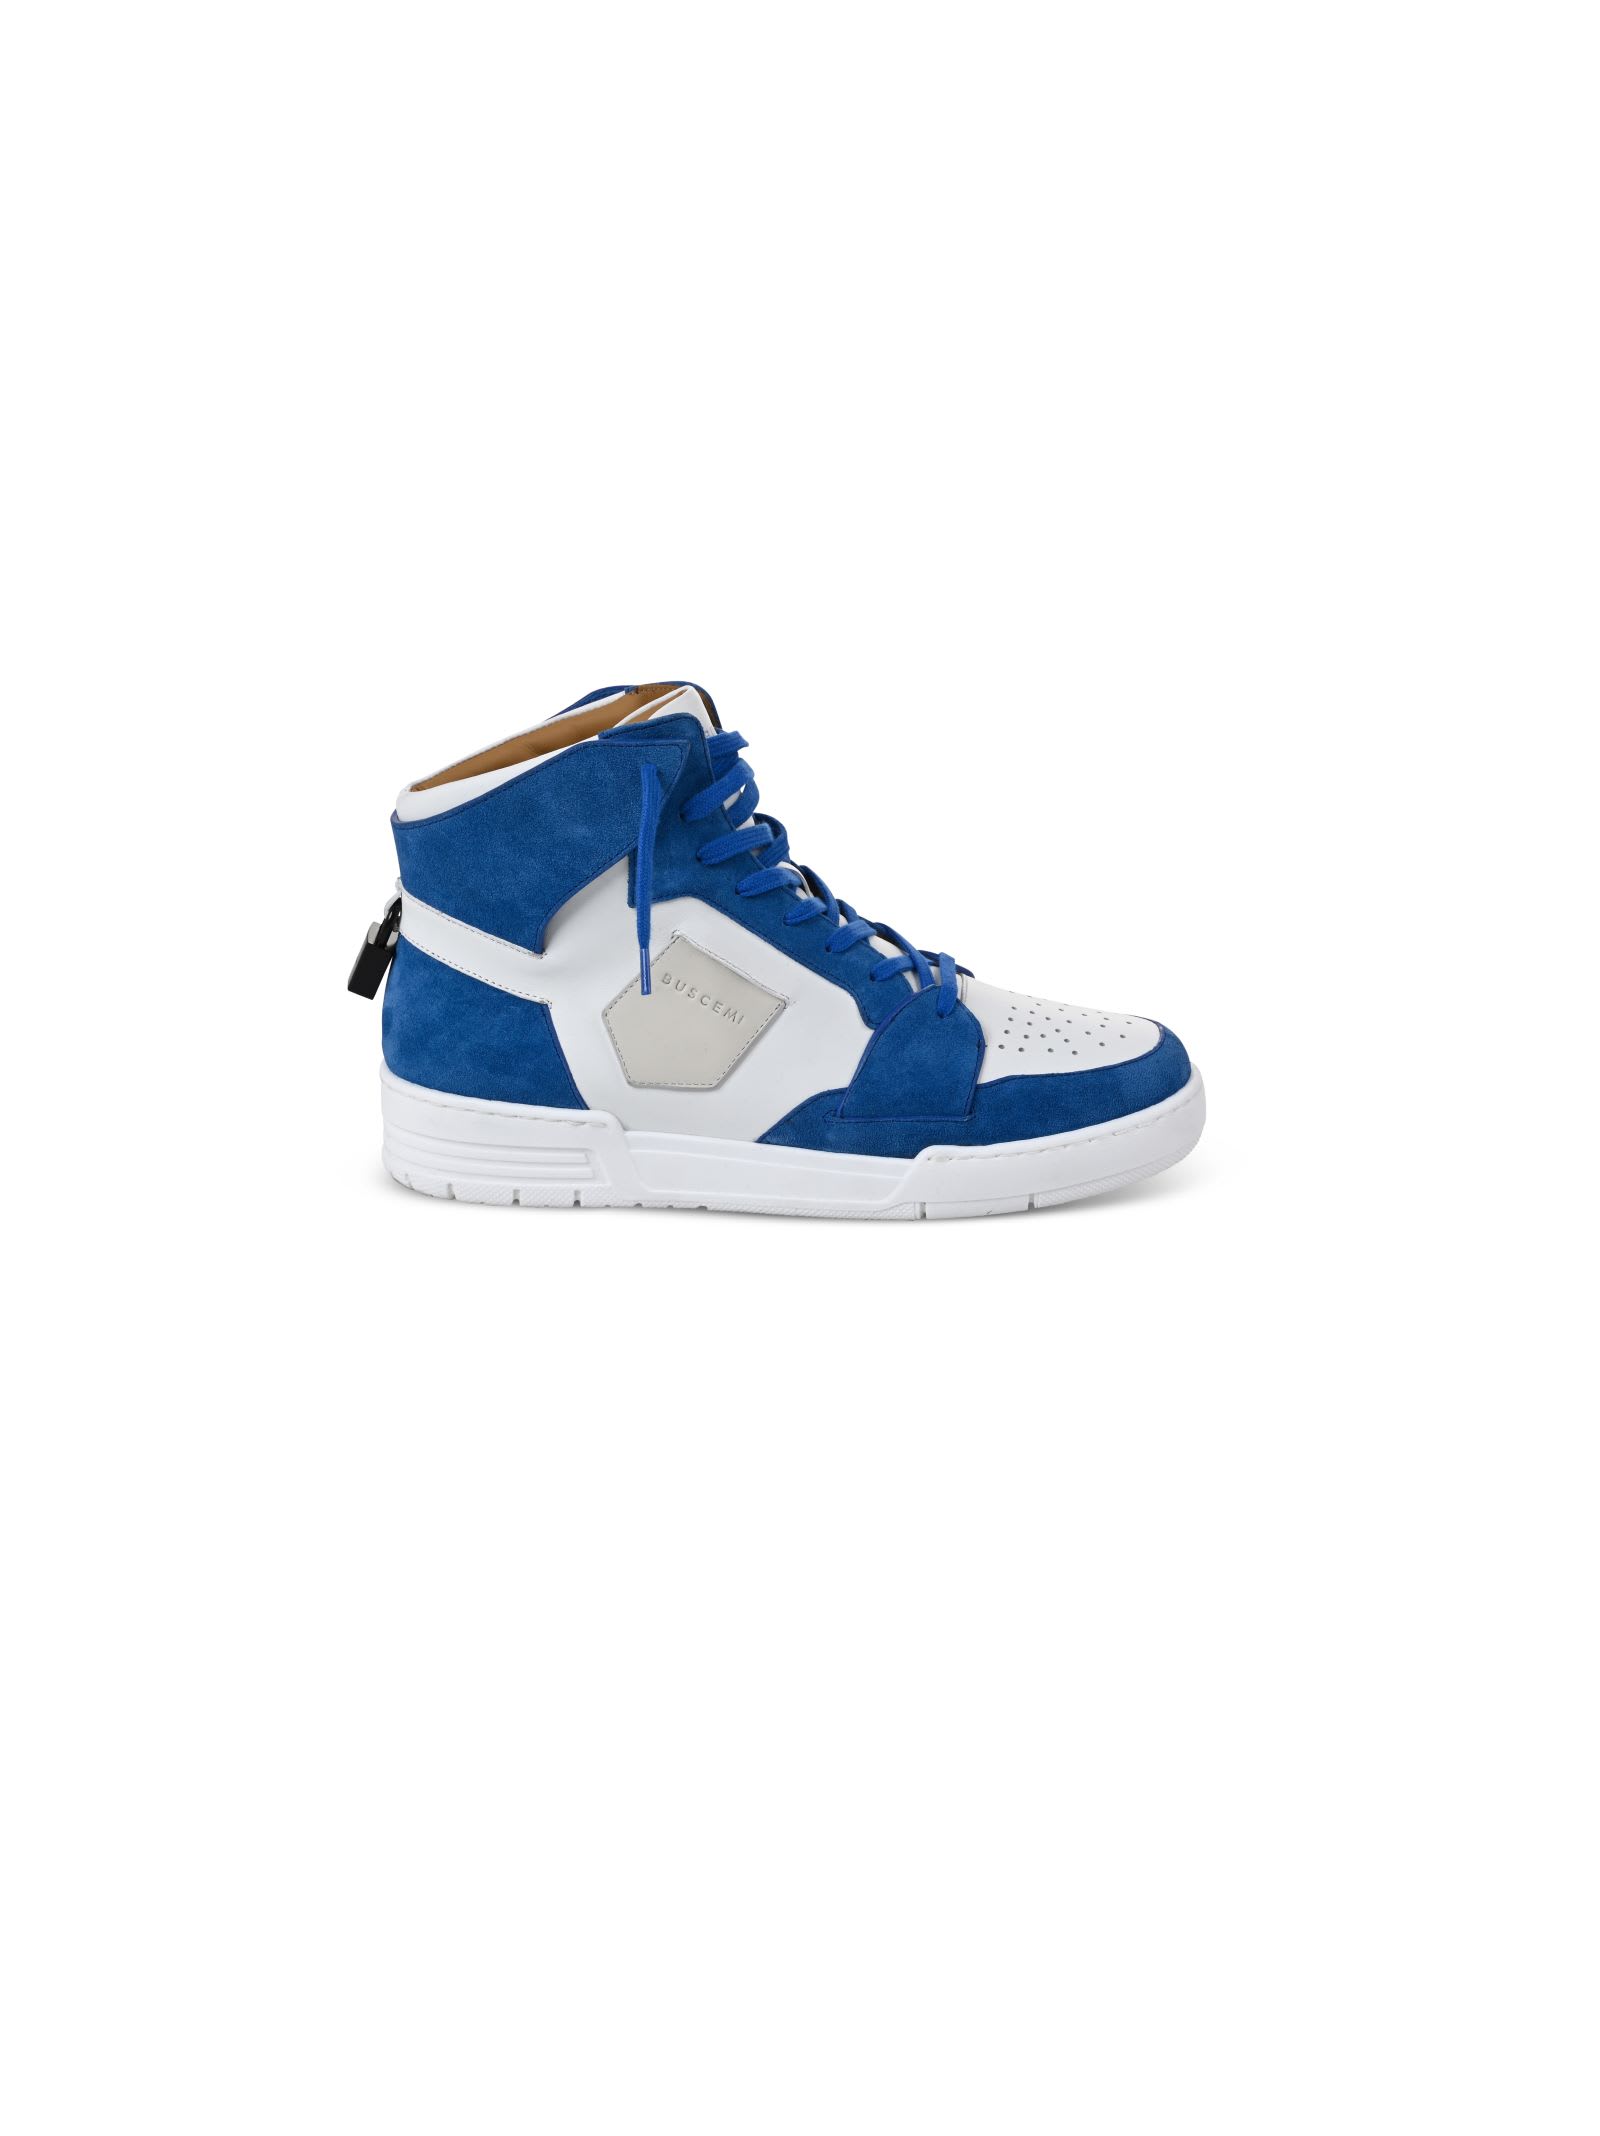 Buscemi Calf Leather Shoes White+blue